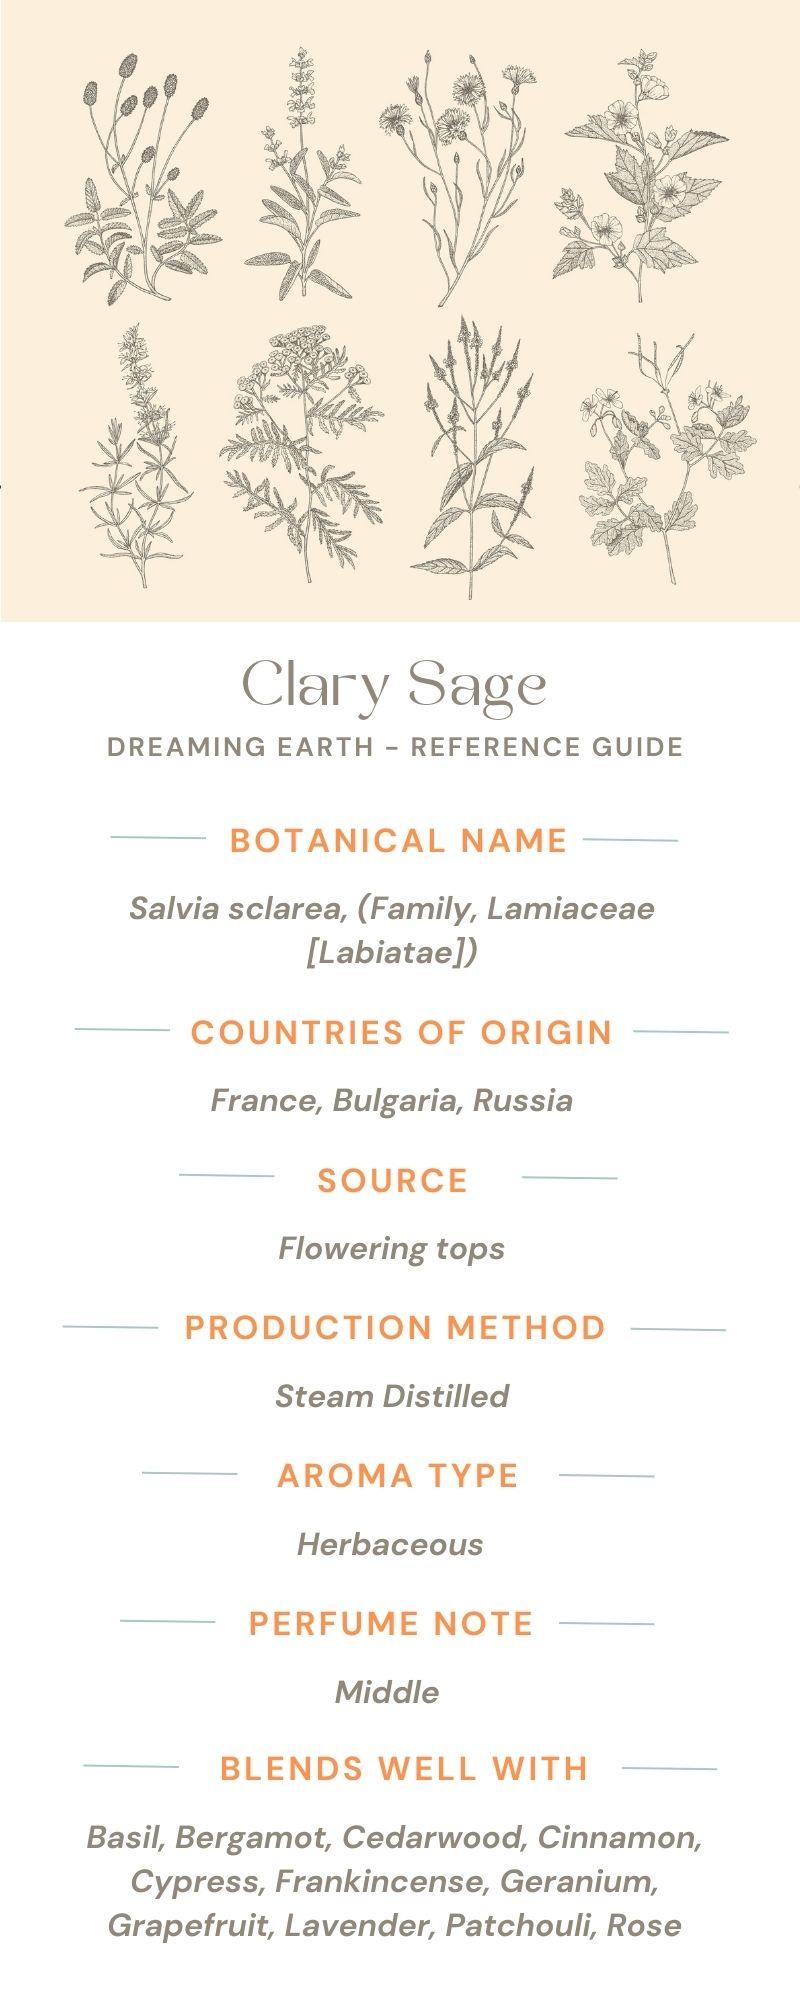 Load image into Gallery viewer, Clary Sage Essential Oil - Dreaming Earth Inc
